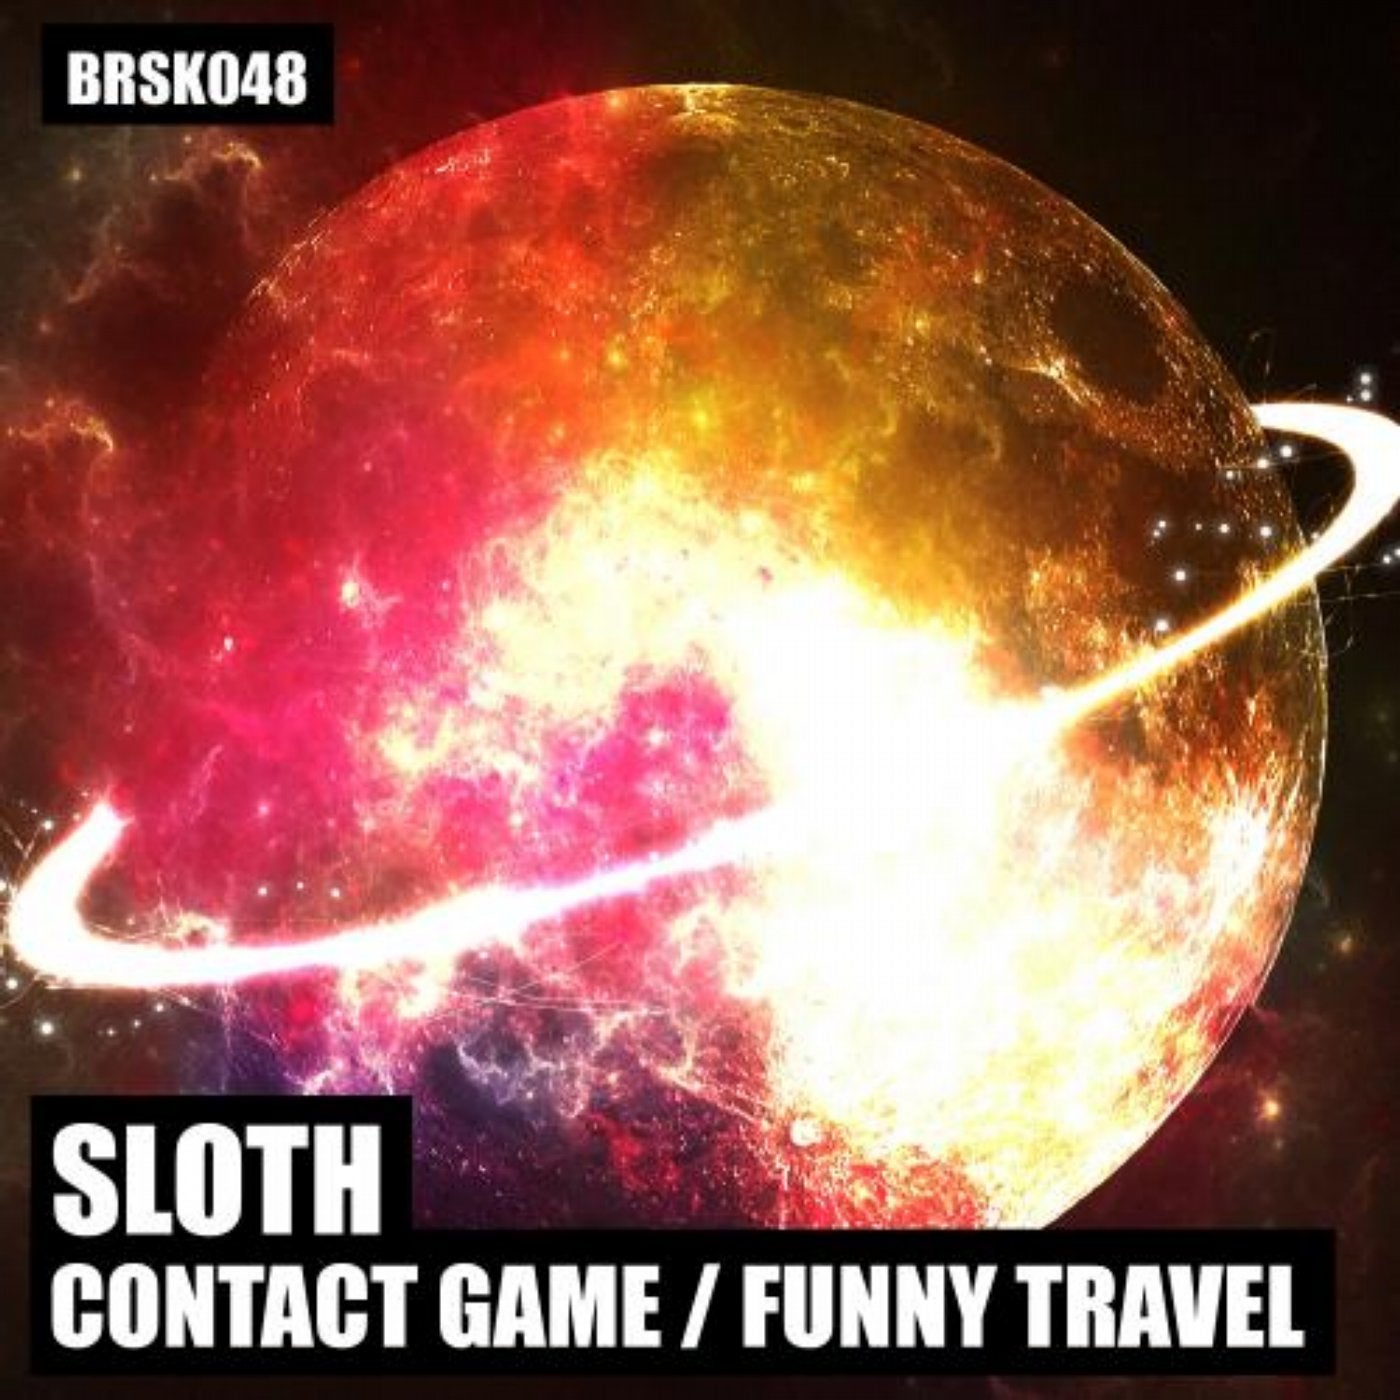 Contact Game / Funny Travel